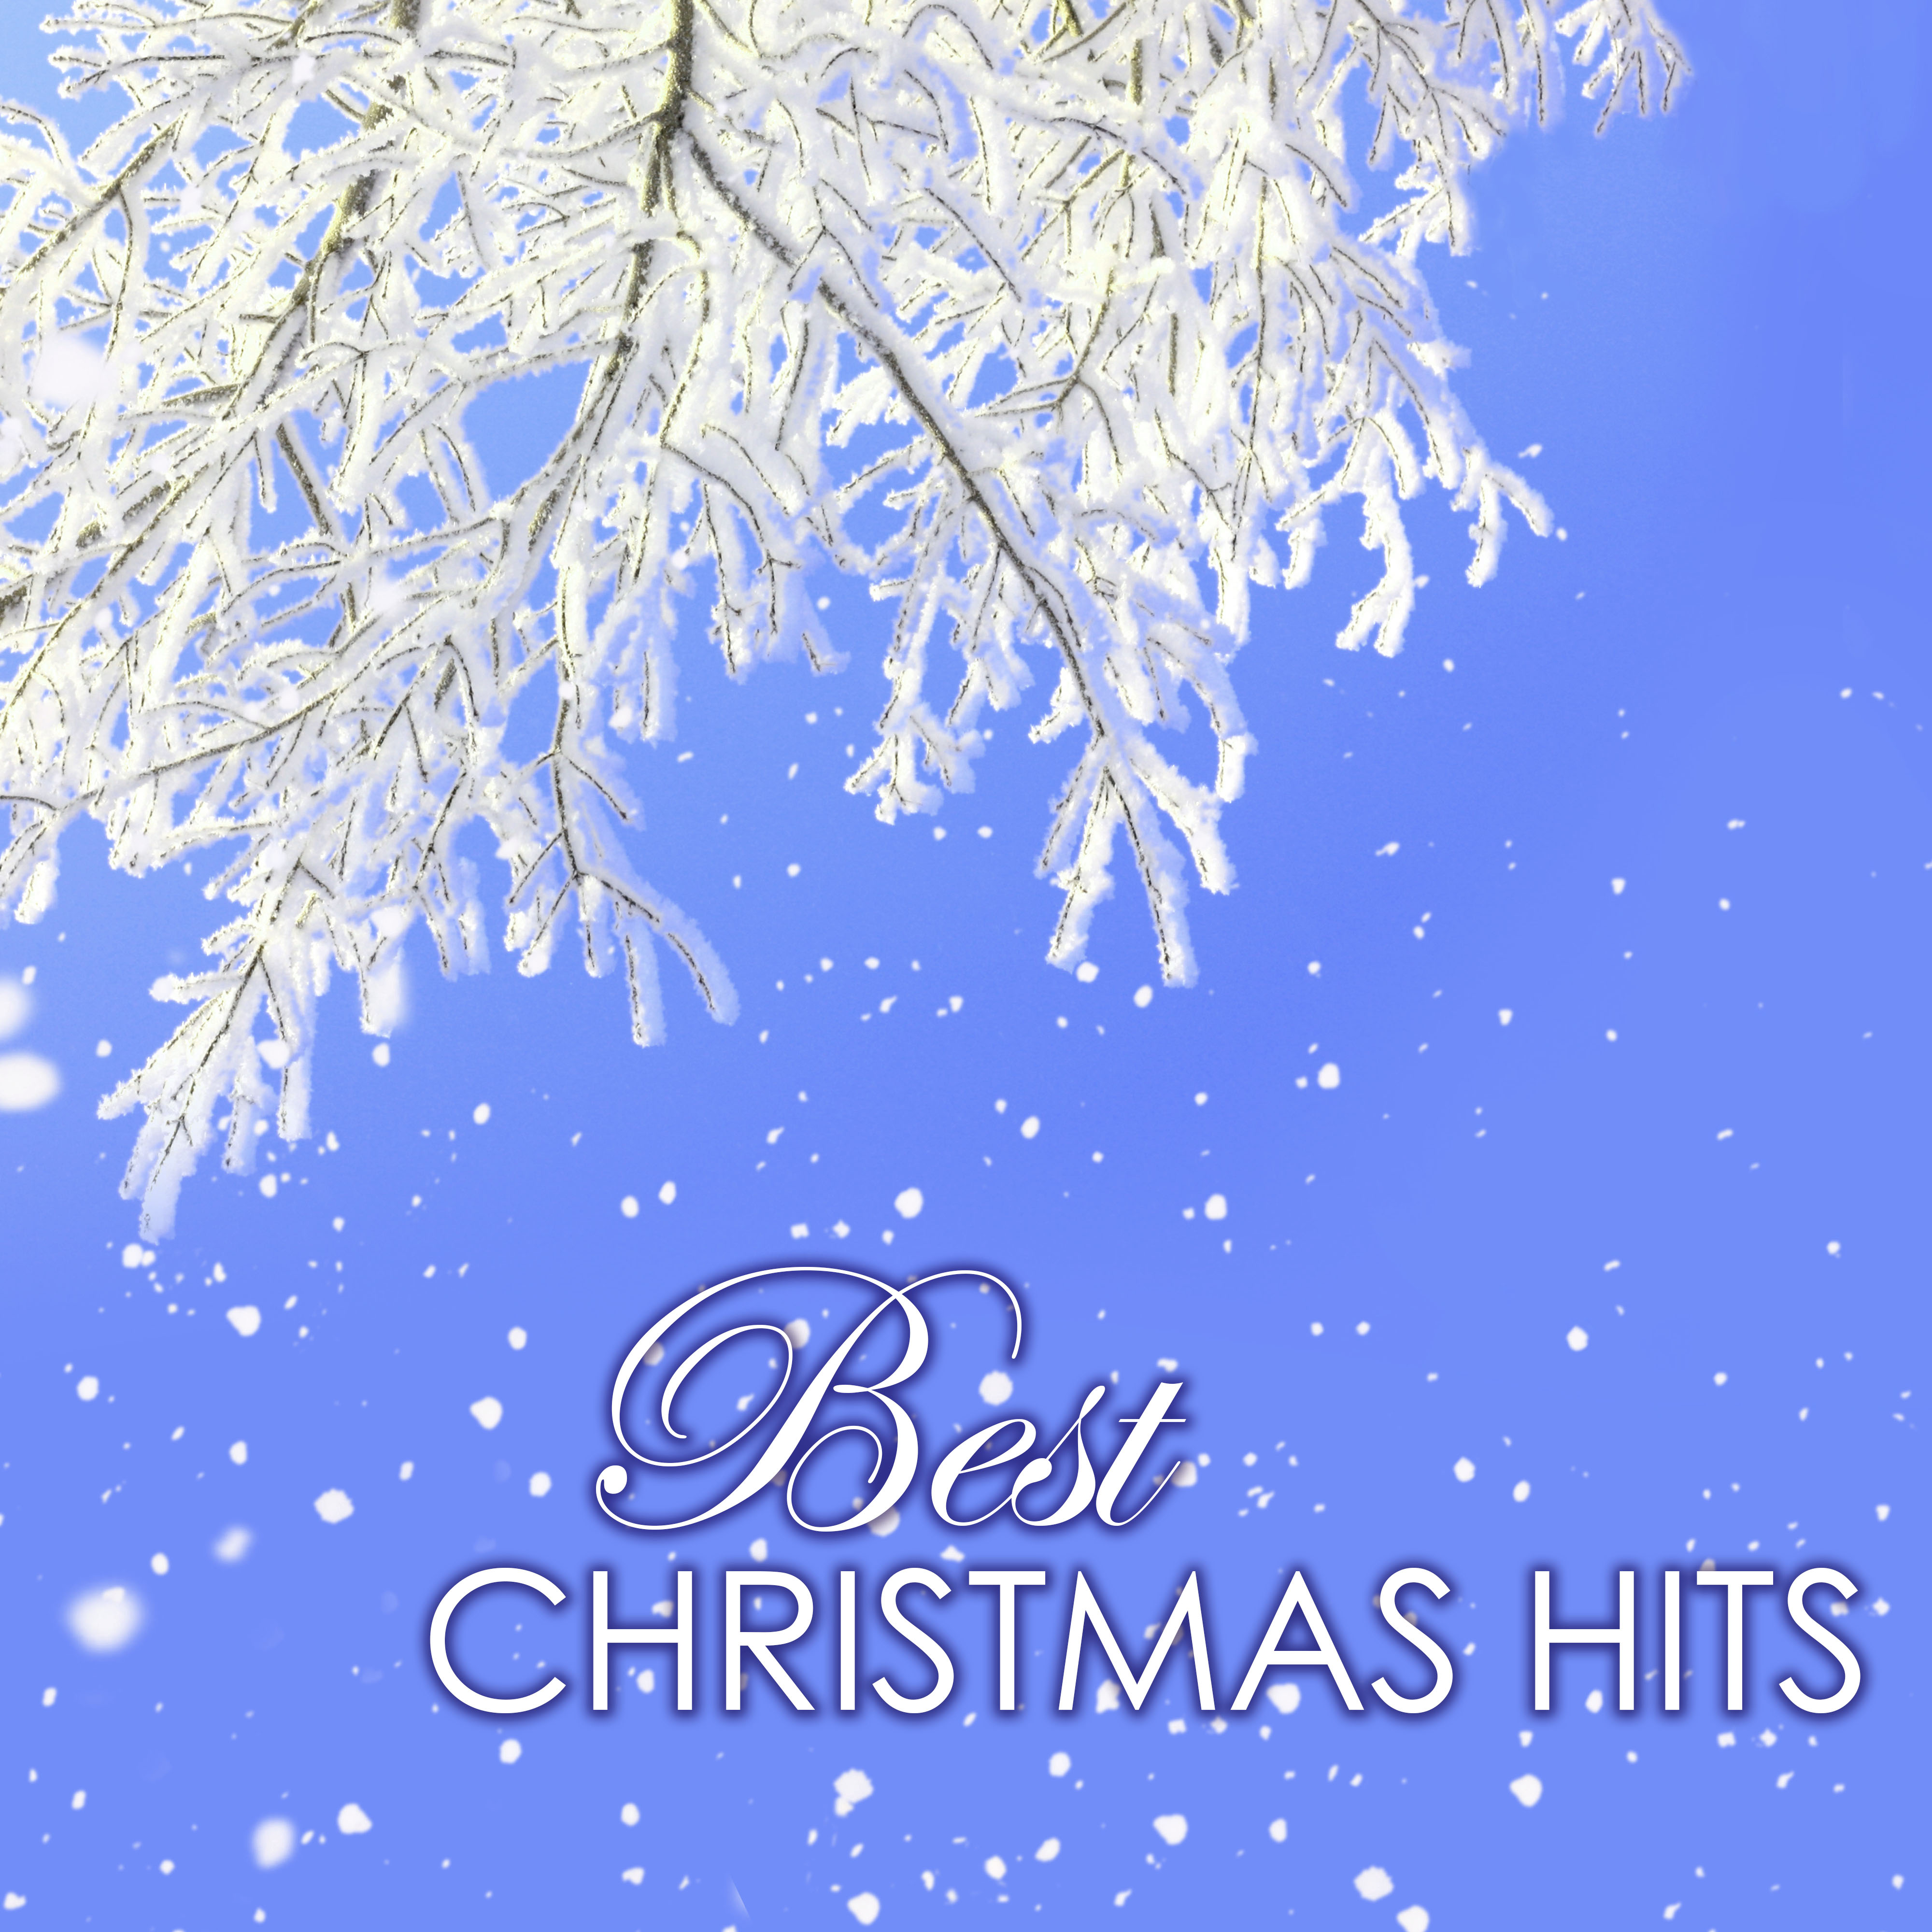 Best Christmas Hits - Pure Celtic Harp Music for Xmas